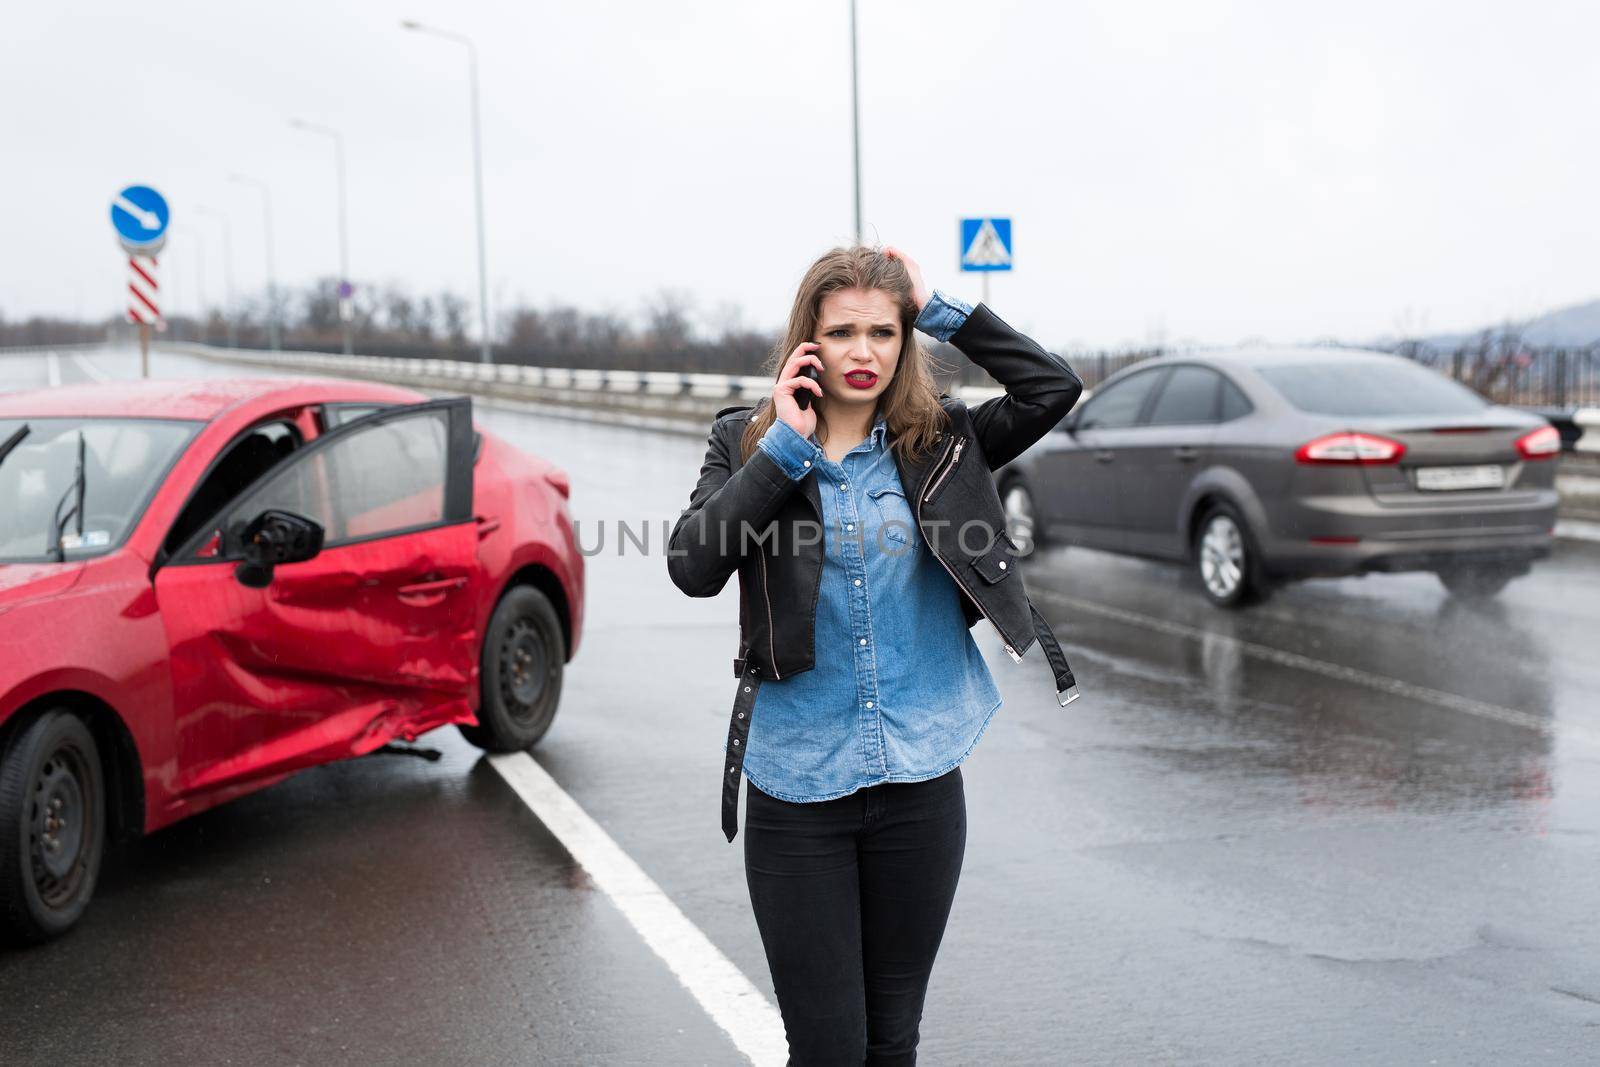 Woman calls to a service standing by a red car. by StudioPeace